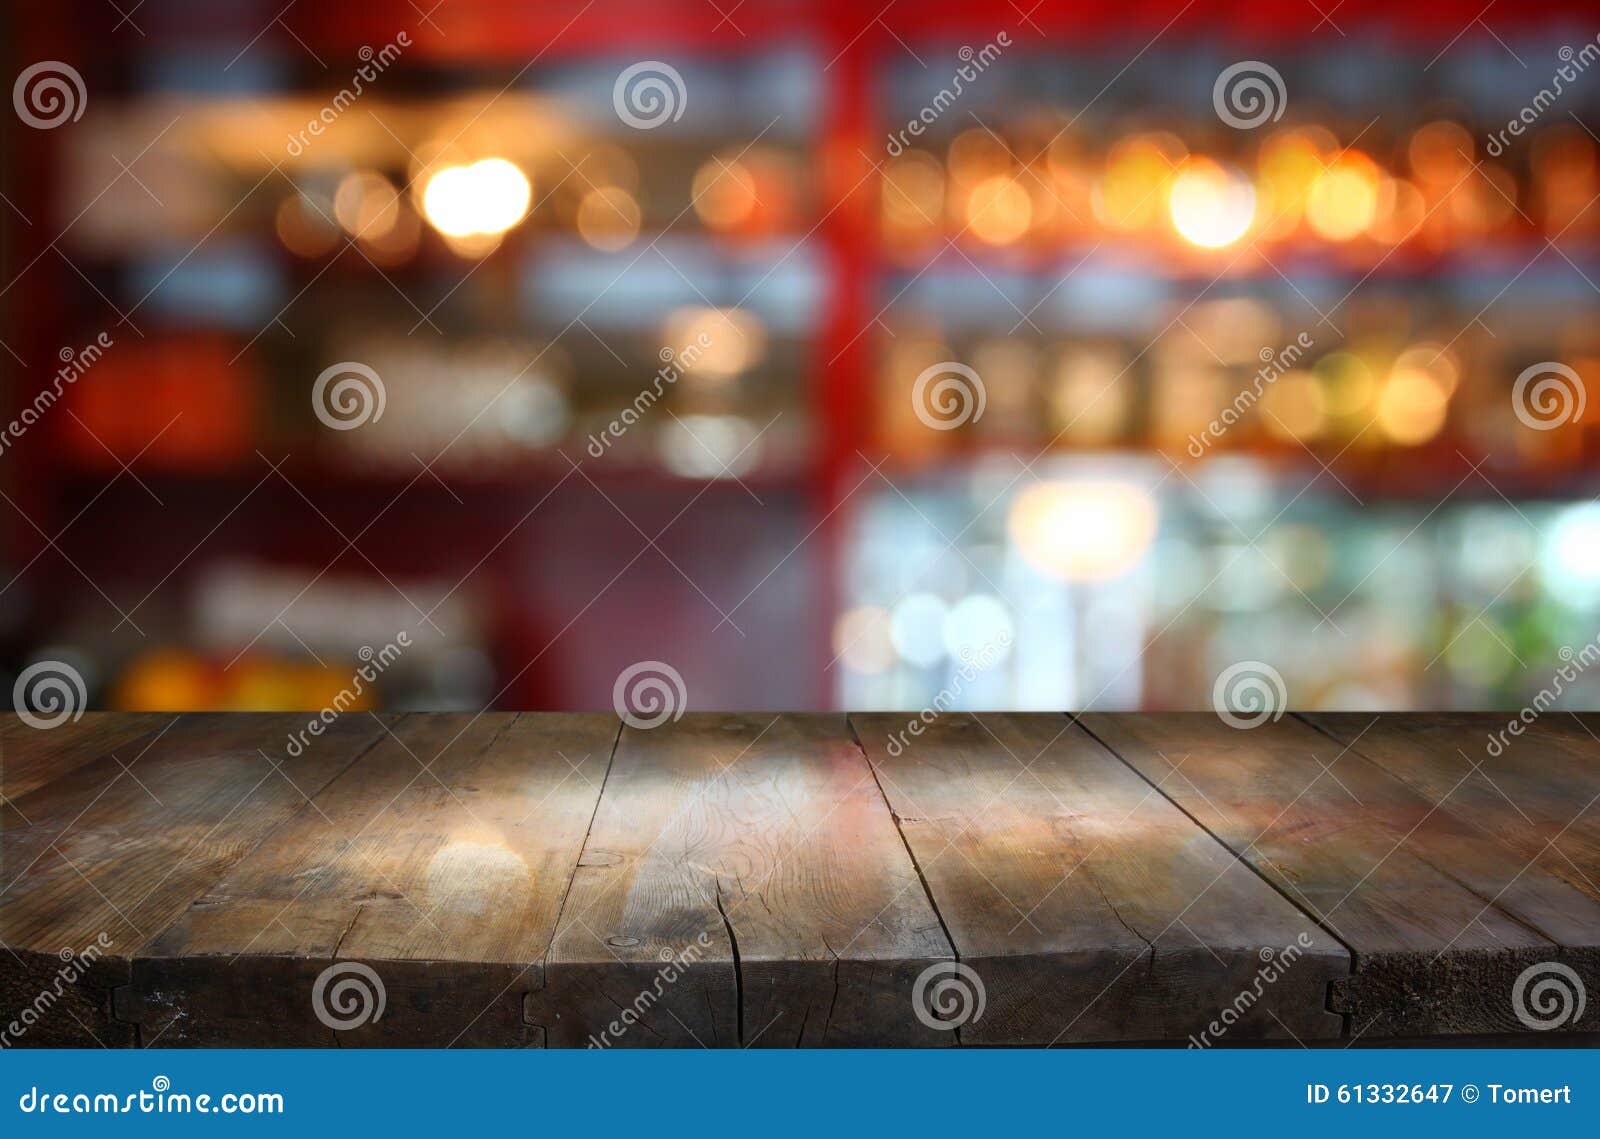 Image Of Wooden Table In Front Of Abstract Blurred Background Of Restaurant  Lights Stock Photo 61332647 - Megapixl